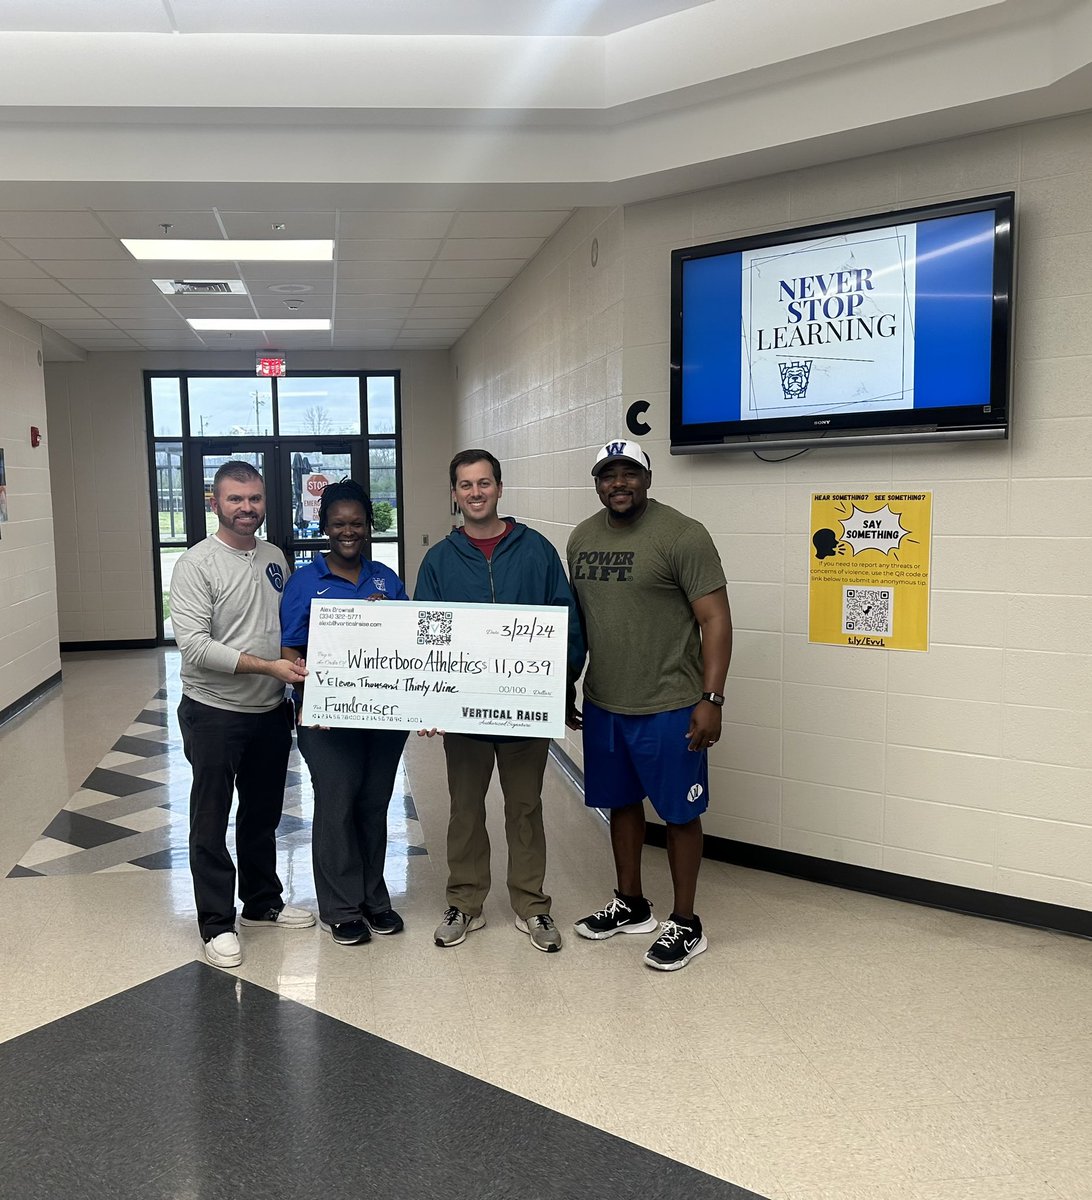 We are proud of @WboroSports and @mansfield16 for the hard work and dedication on our athletic program fundraiser. Great things are happening! There is always WIN in Winterboro! 💙🐶